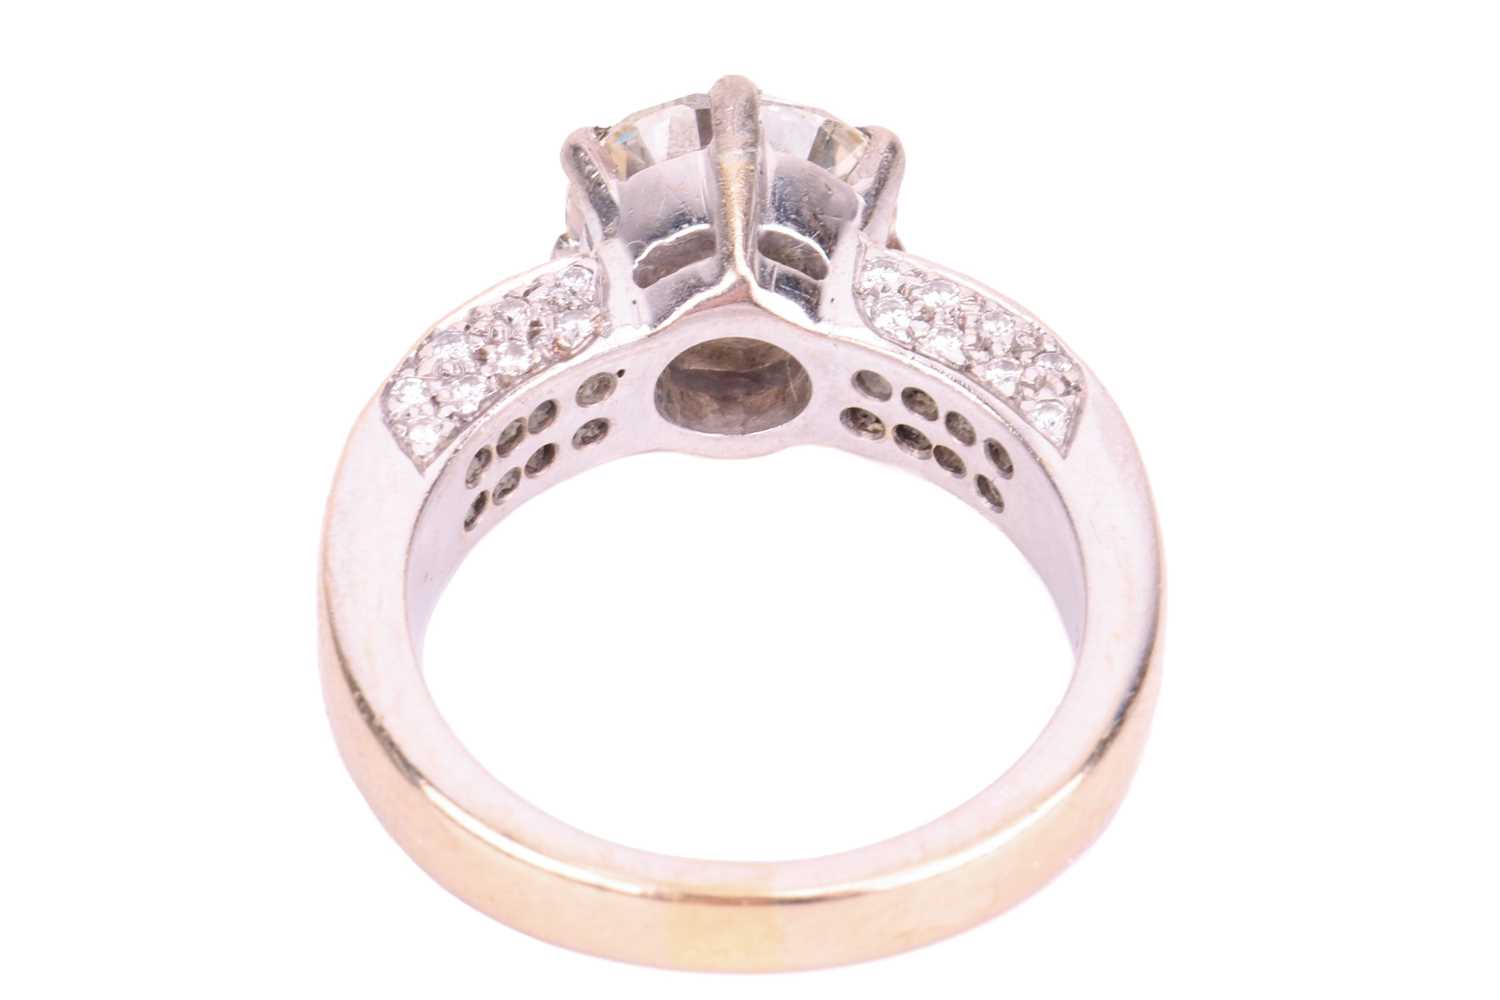 A diamond solitaire ring with diamond set shoulders, featuring a 3.02ct round brilliant cut diamond  - Image 4 of 5